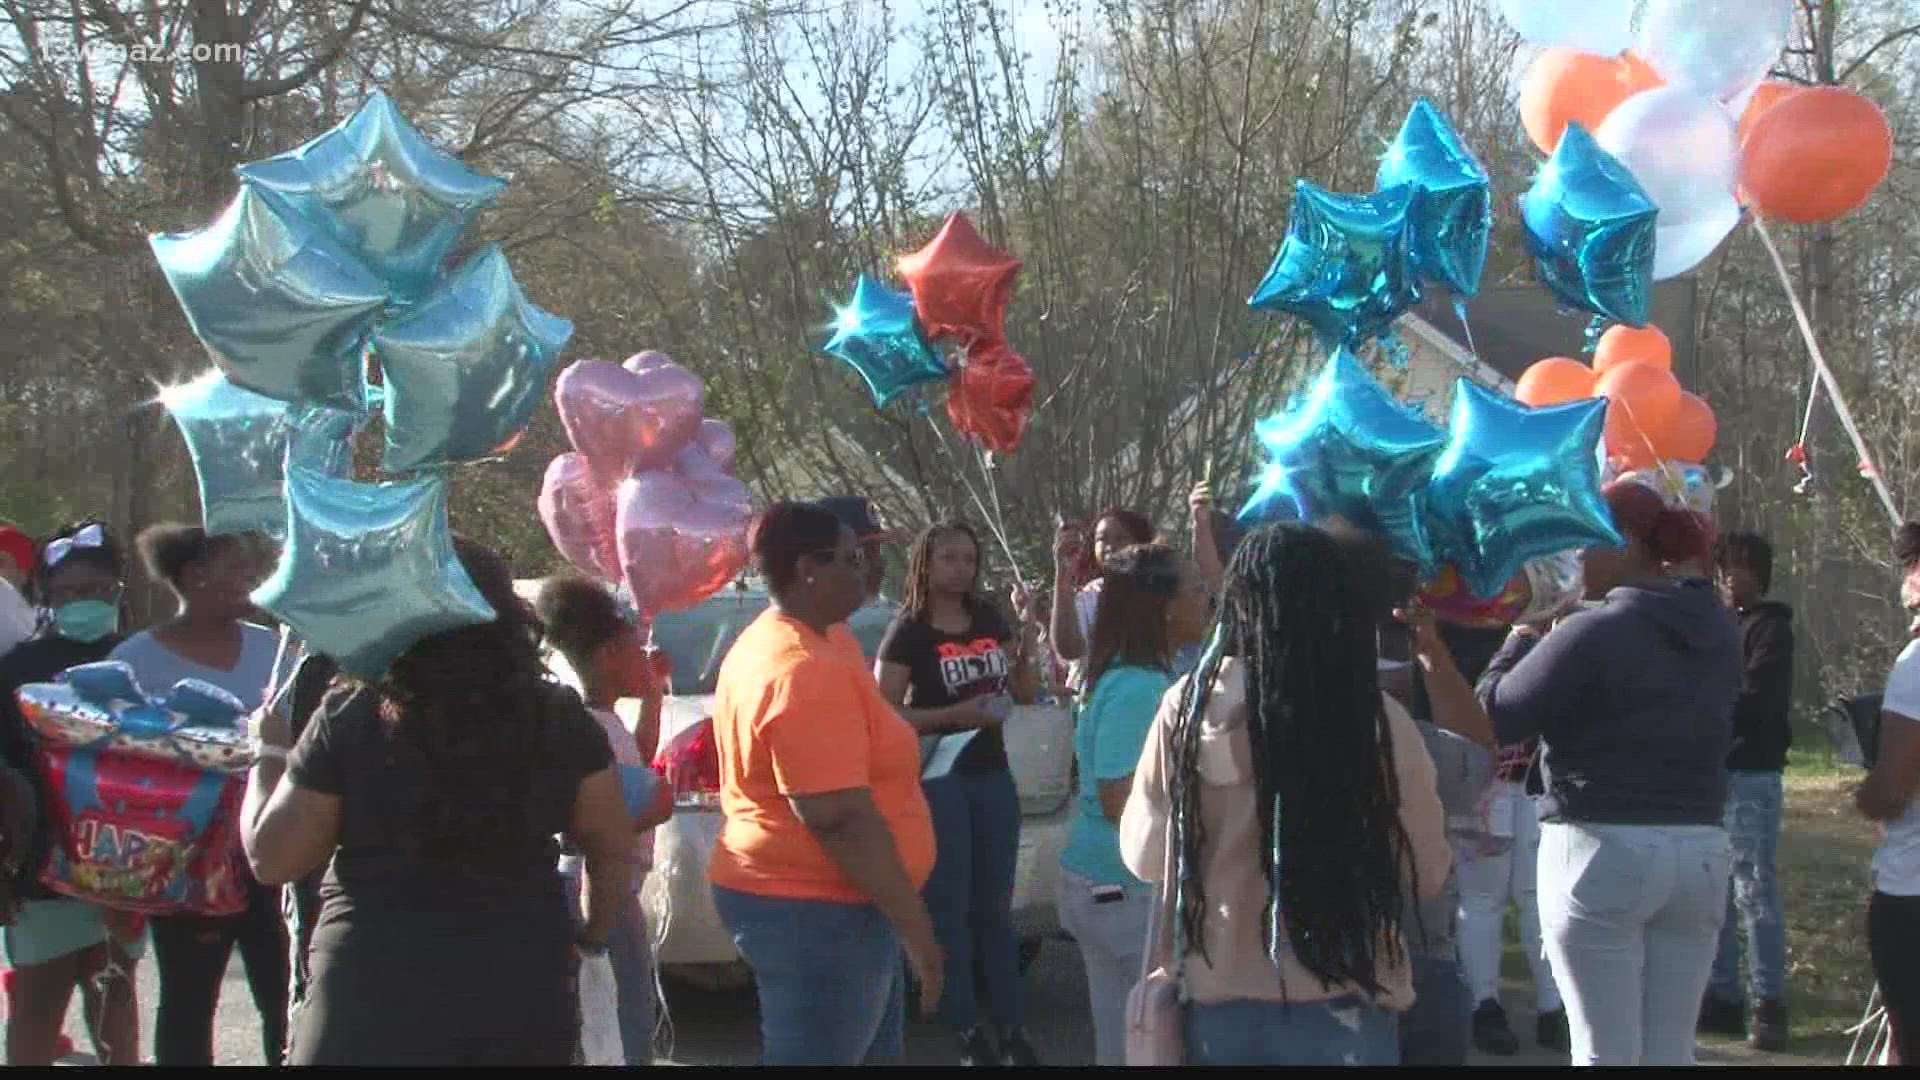 Toriyahna Proctor's friends say they held the balloon release on March 24 because it is her birthday. She would have been 22.